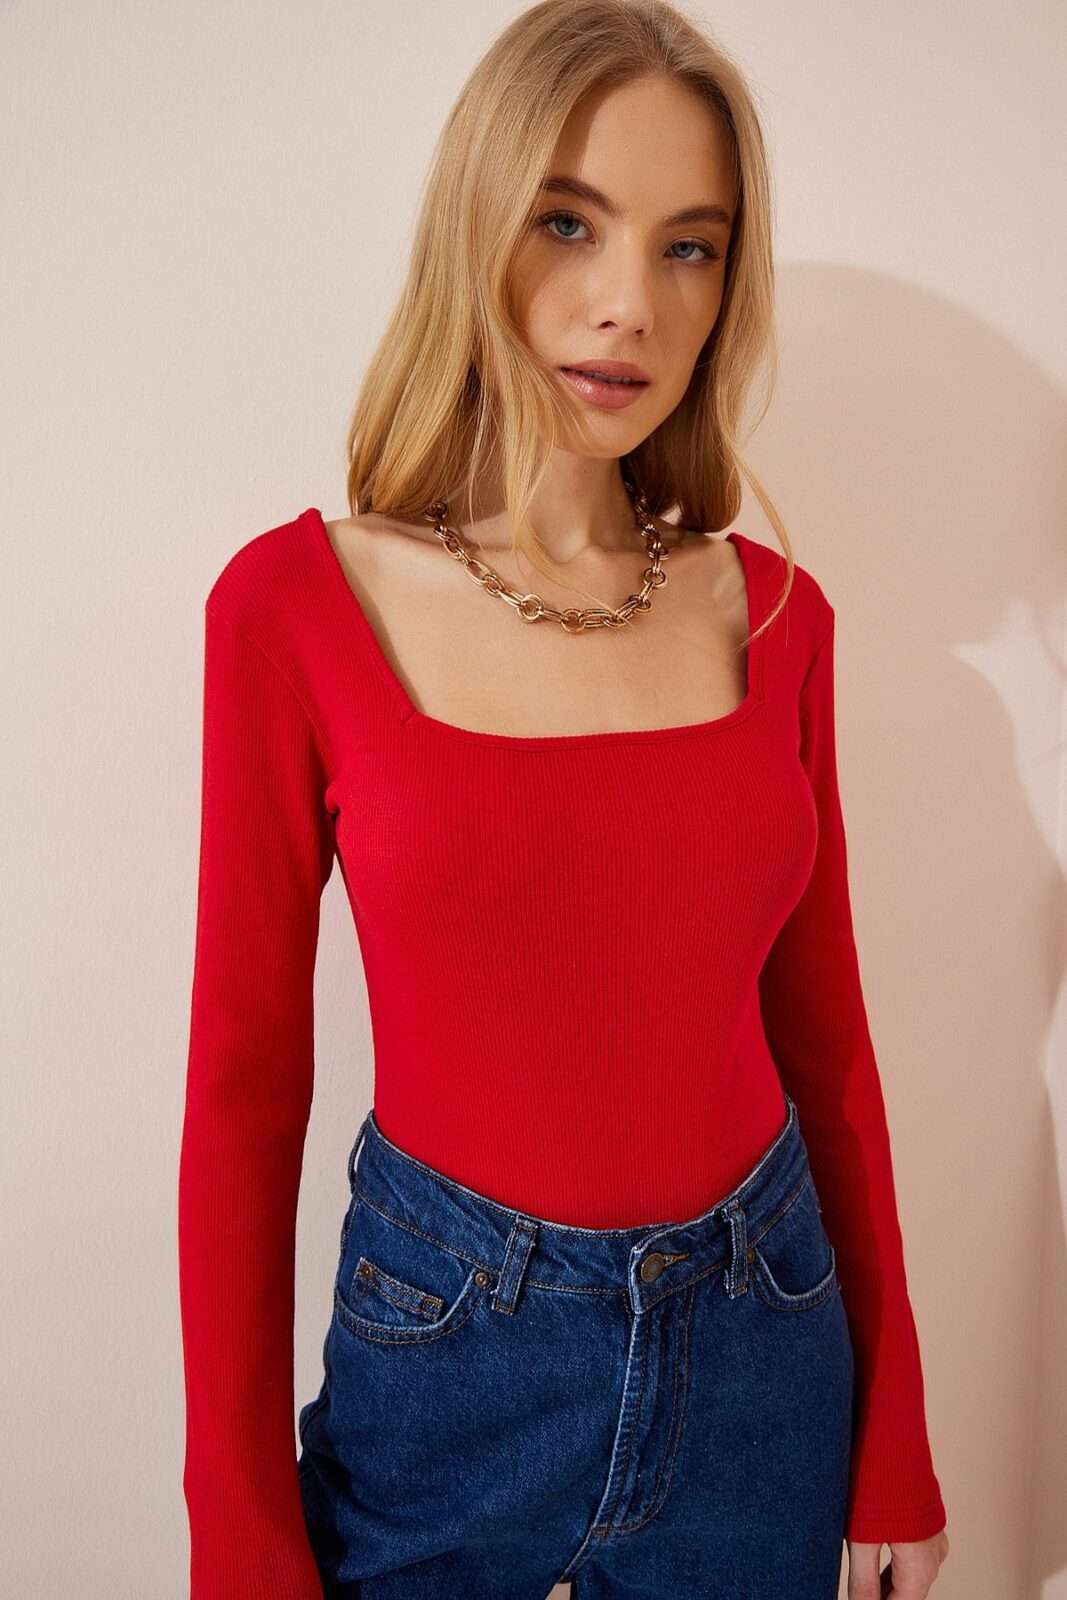 Happiness İstanbul Blouse - Red